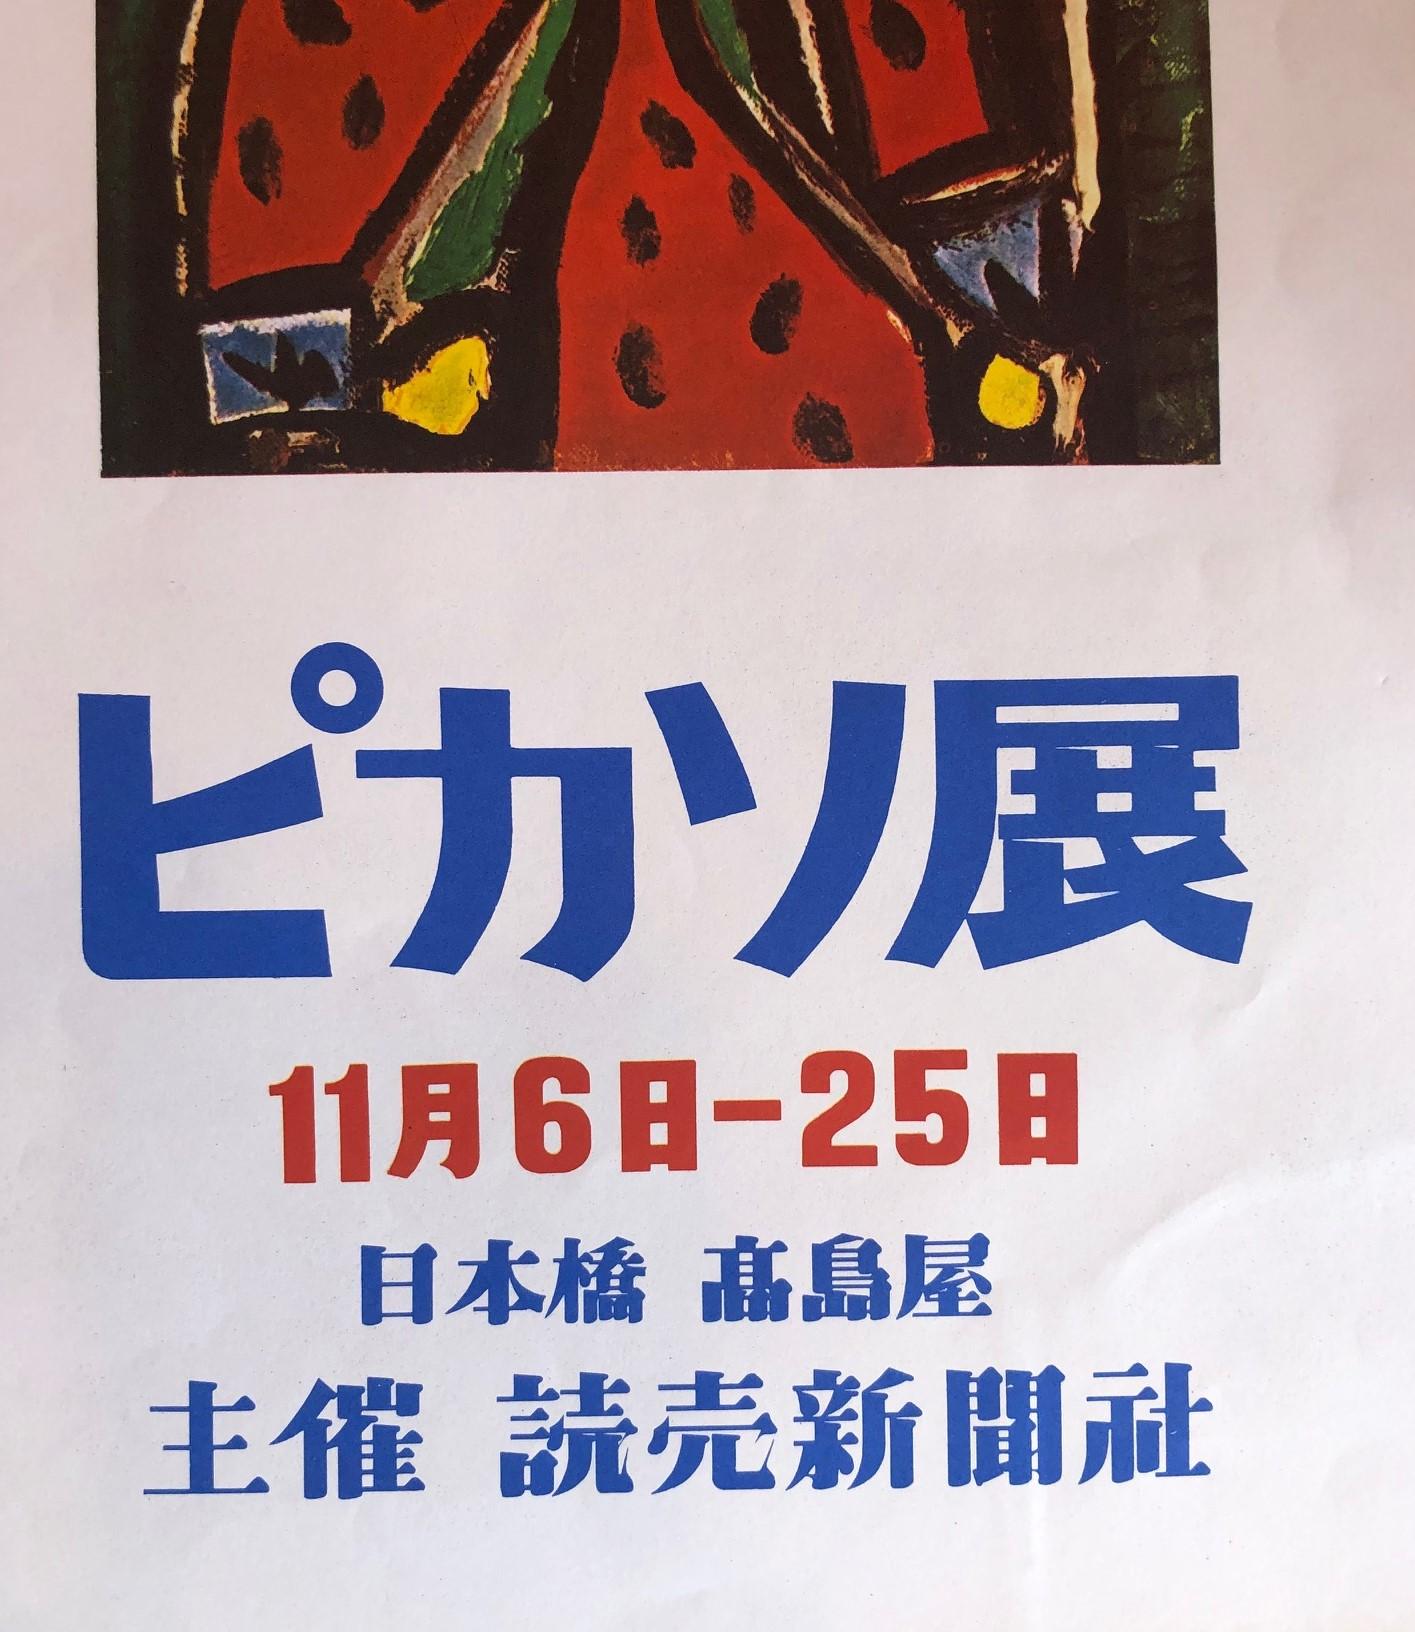 Mid-Century Modern Midcentury Japanese Kanji Lettering Poster of Pablo Picasso's Exhibition